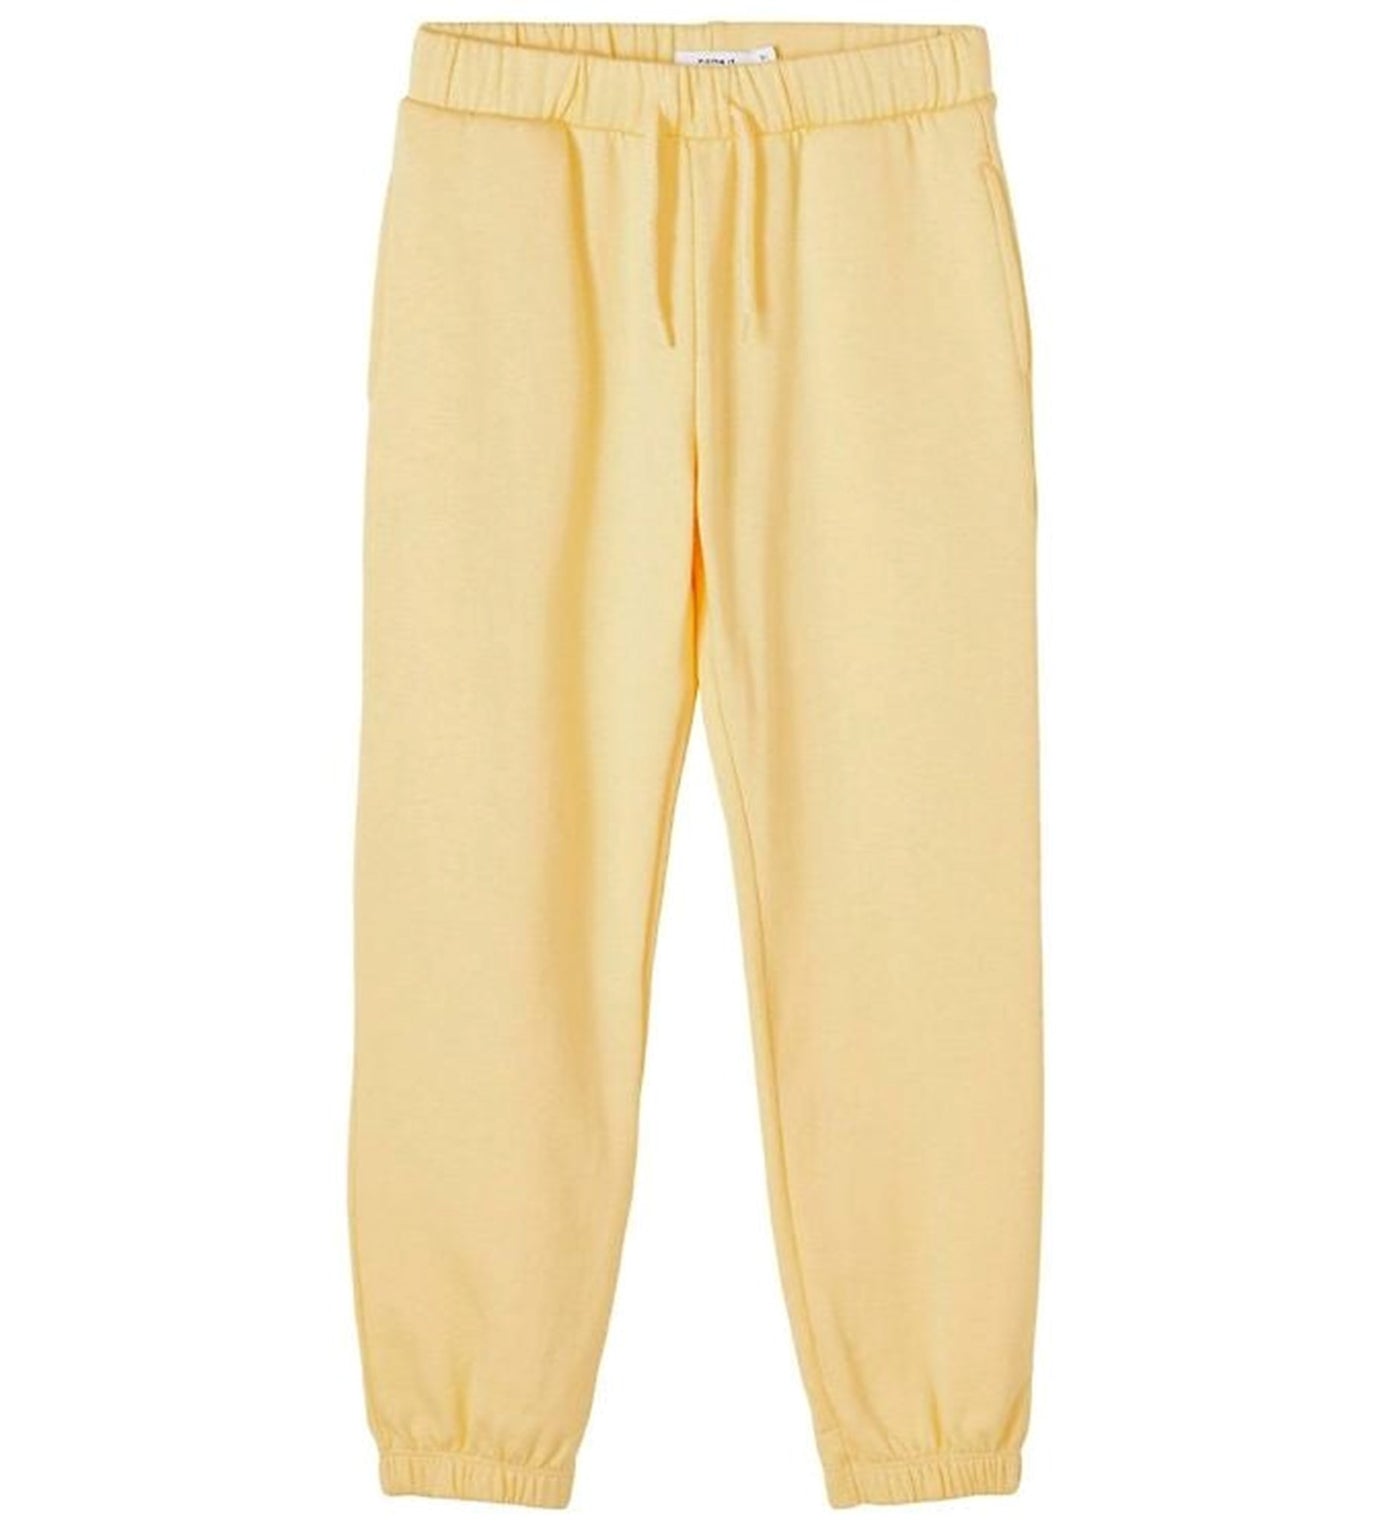 Loose fit Sweatpants - Sunlight - Name It - Yellow